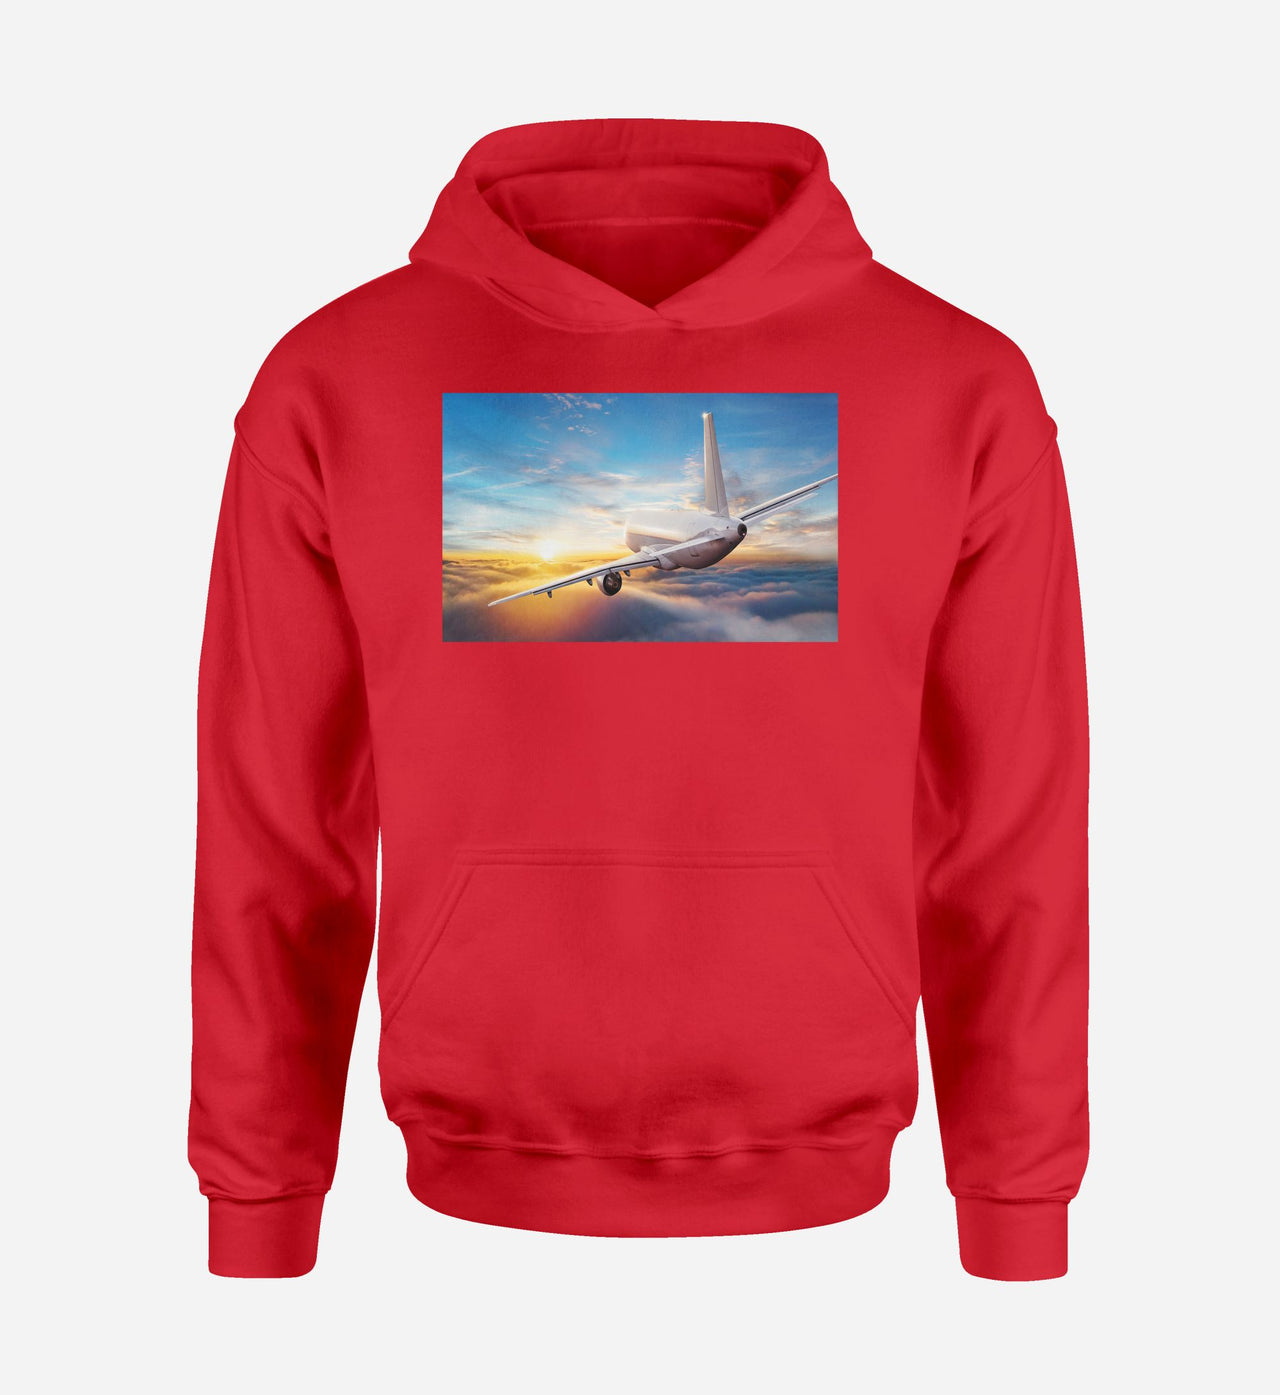 Airliner Jet Cruising over Clouds Designed Hoodies